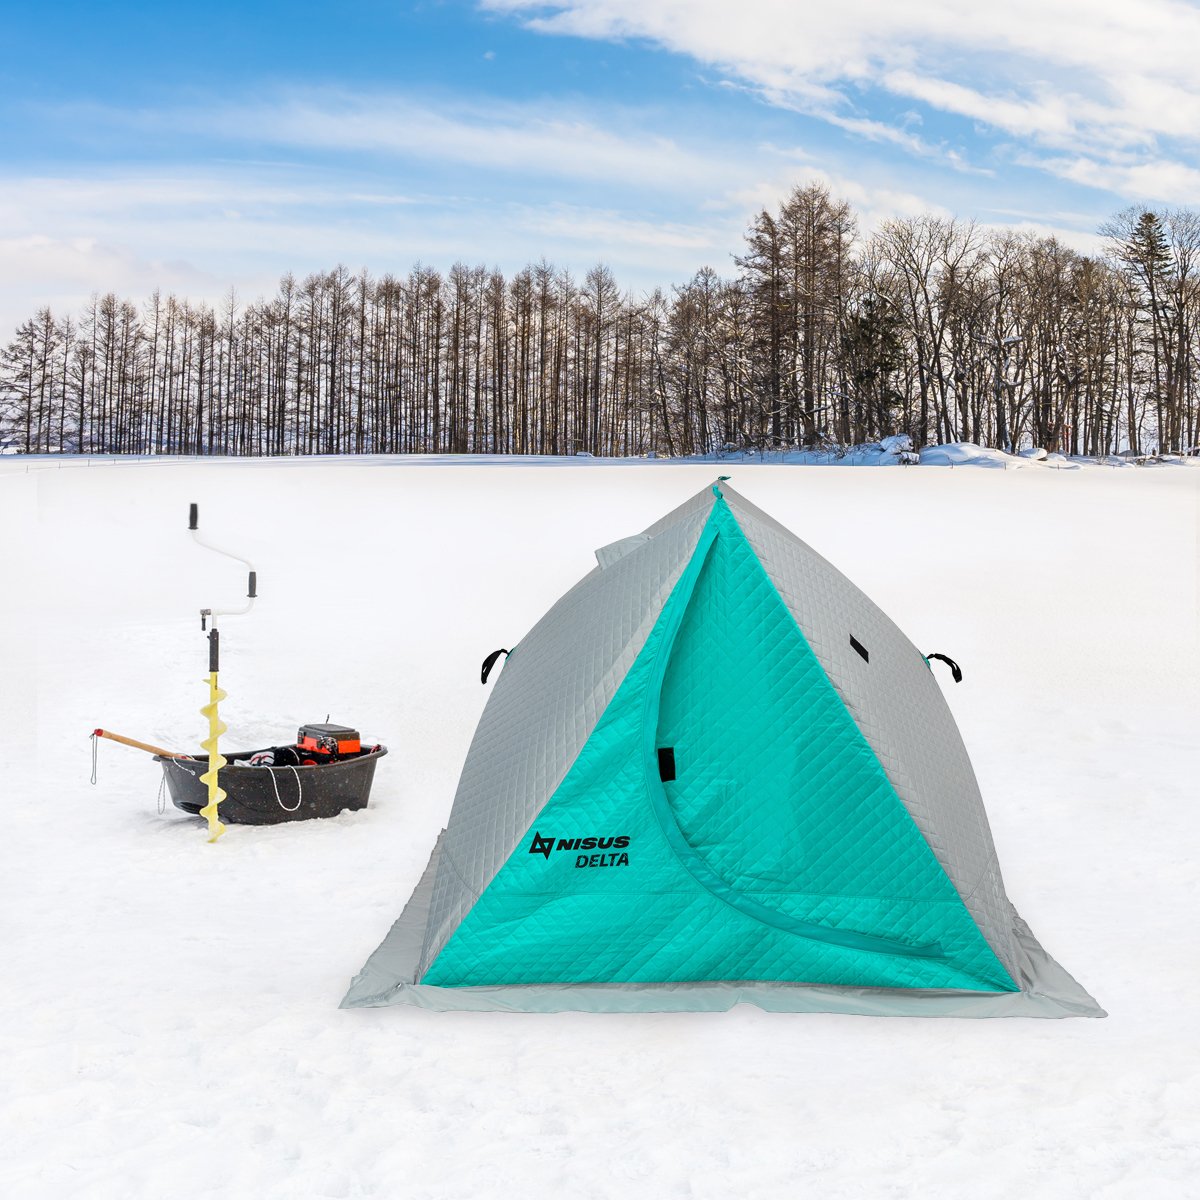 Delta Portable Insulated Ice Fishing Tent Shelter for 2 Persons, gray and turqoise, on ice together with Iceberg Siberia hand auger, and an ice sled